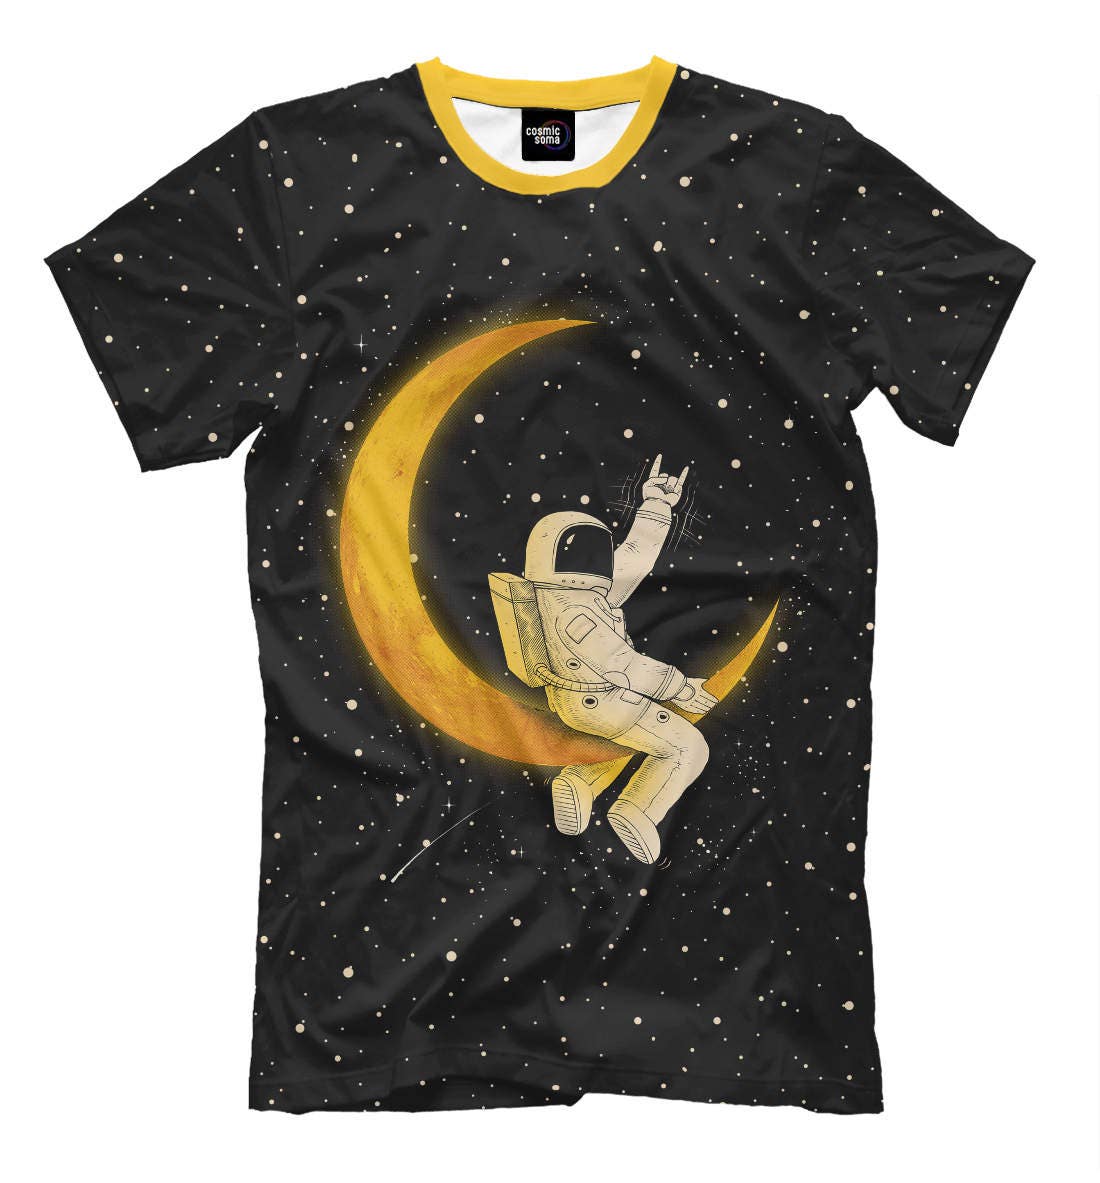 Moon rider psychedelic tee neck t-shirt EDM space lsd